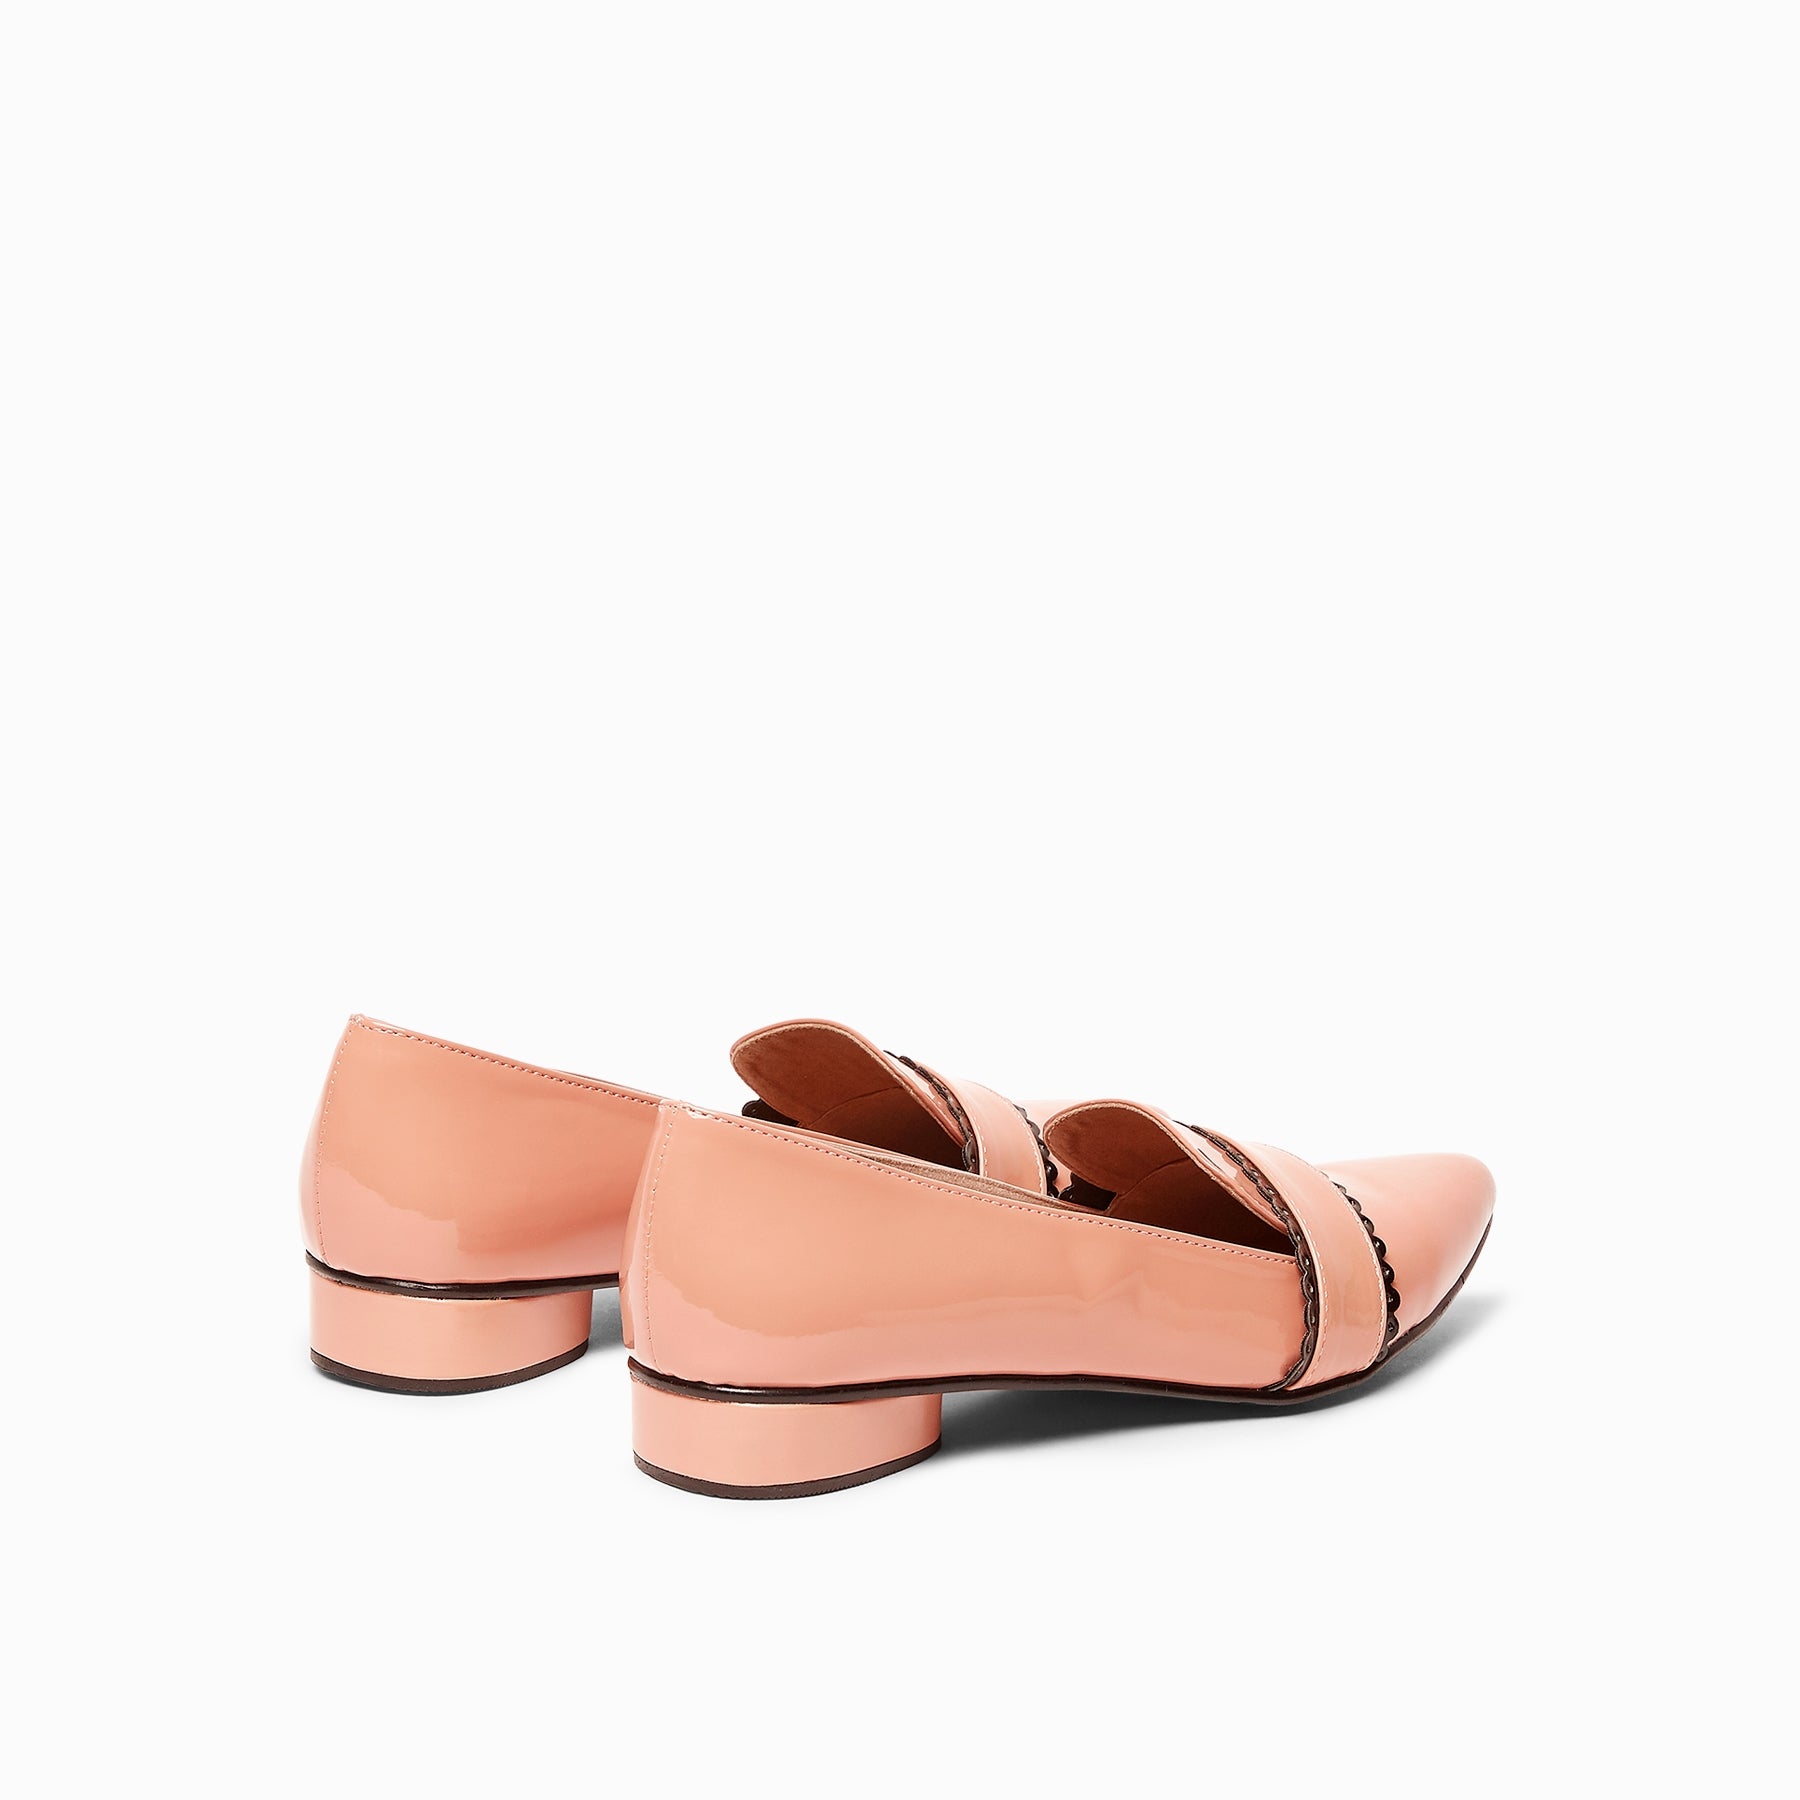 Dusty Rose & Black Scallop Loafers